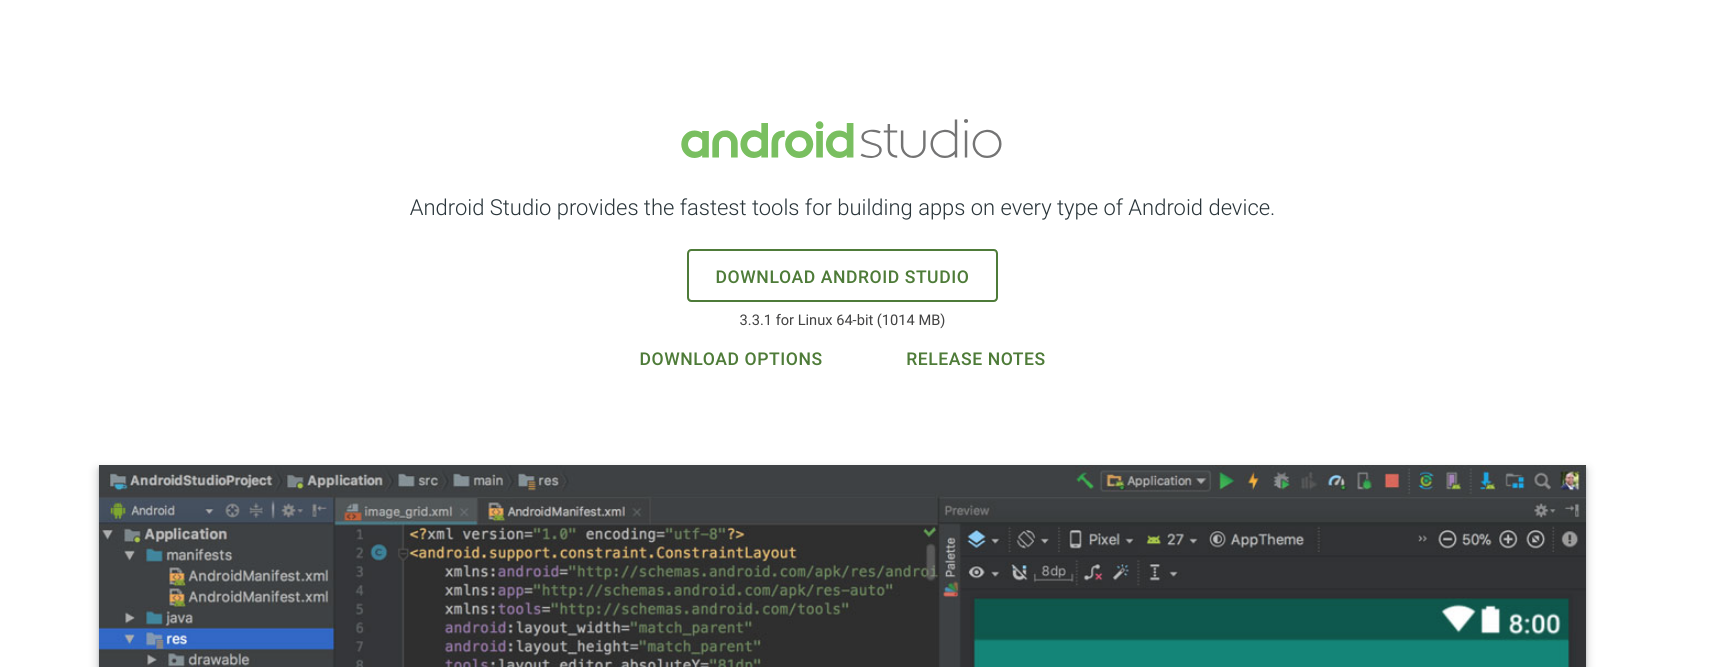 install android studio on your system